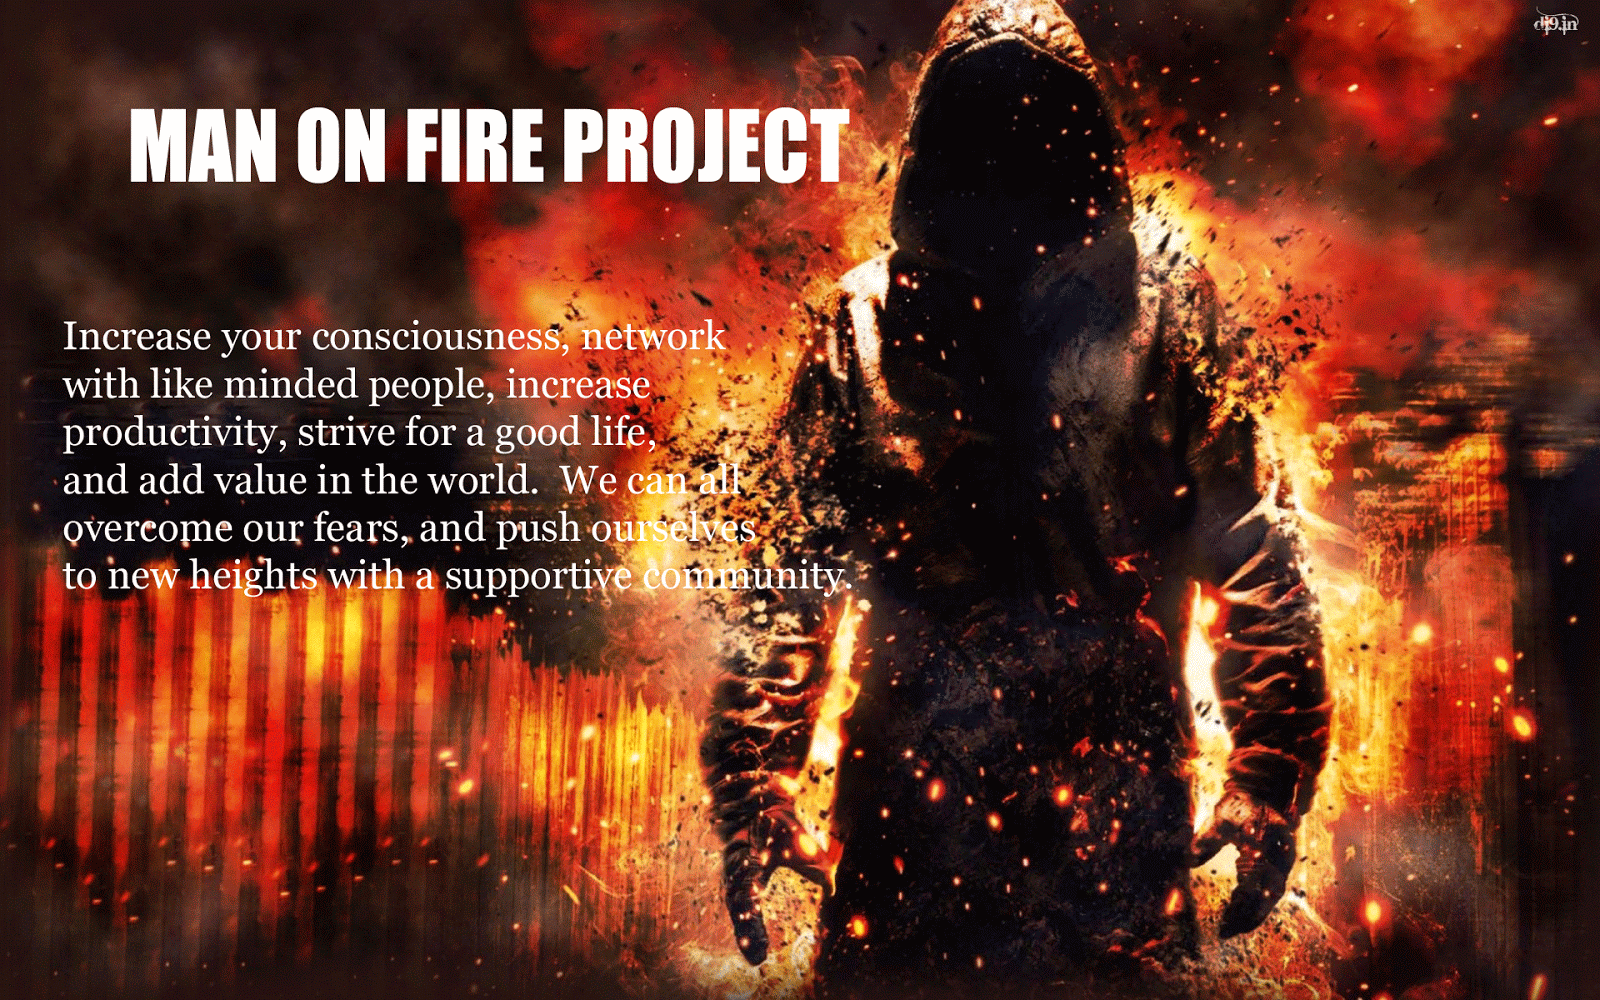 MAN ON FIRE PROJECT